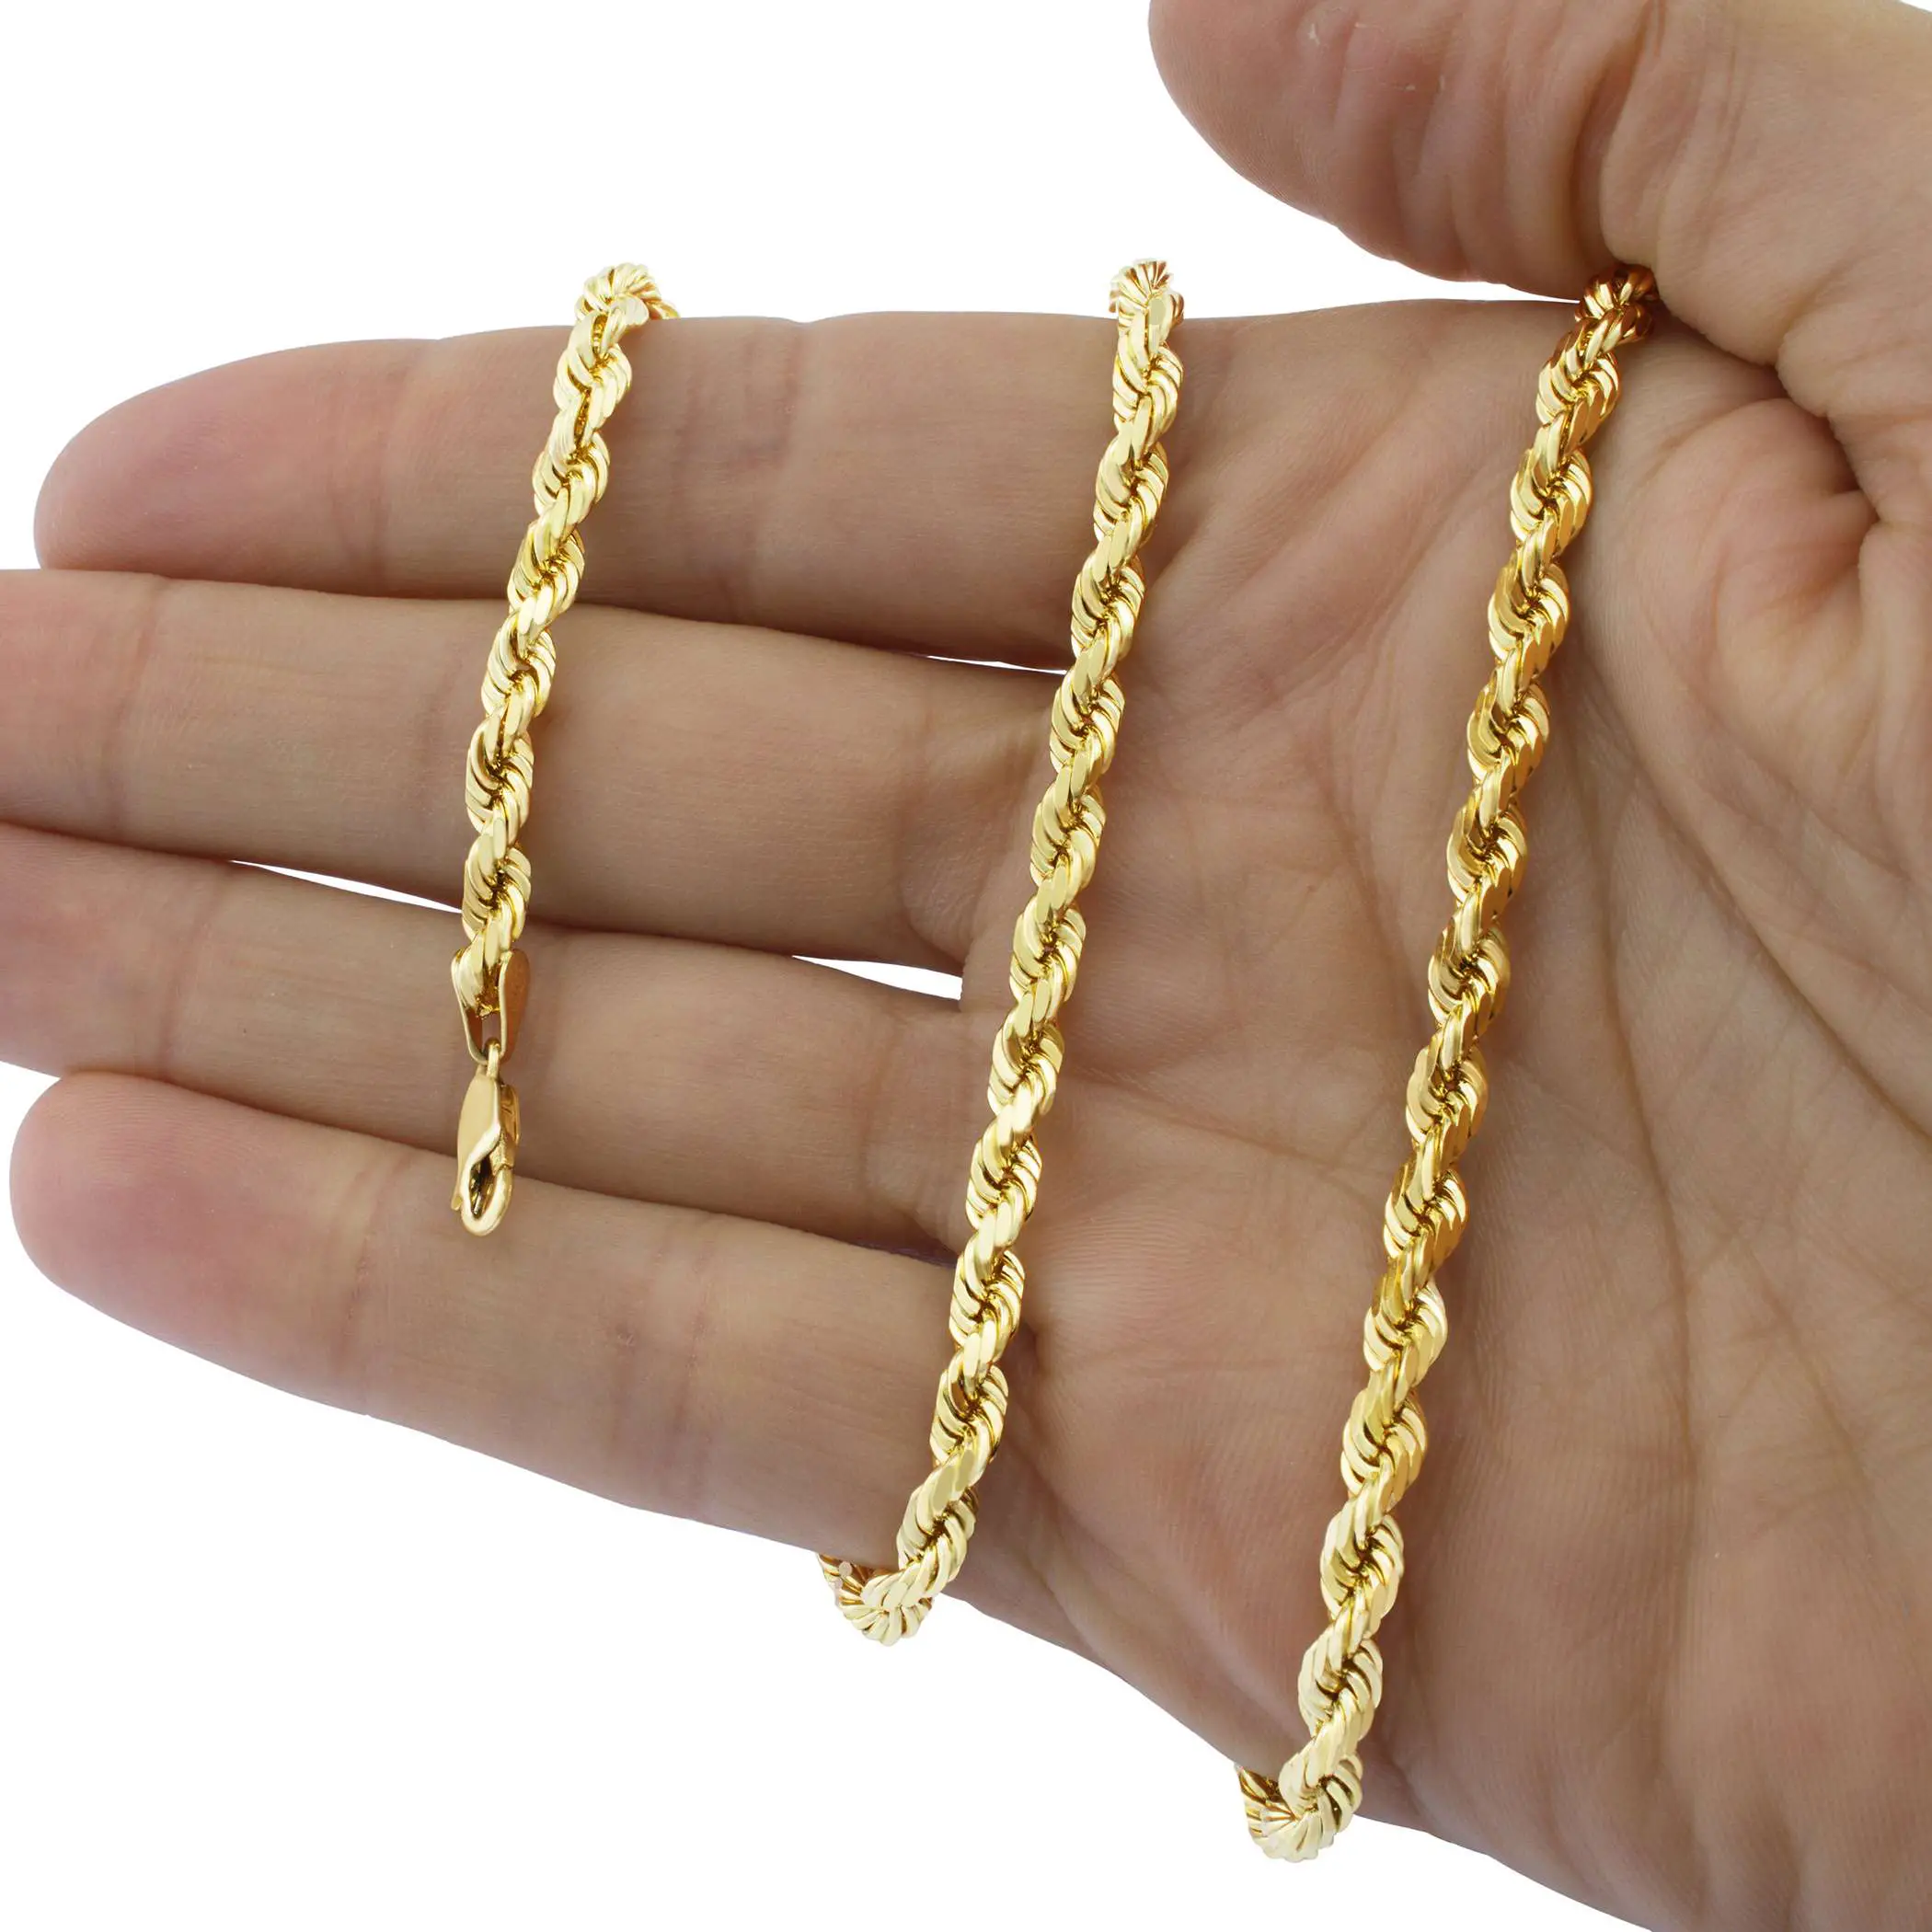 Solid 14K Yellow Gold Real 6mm Italian Diamond Cut Rope Chain Necklace ...